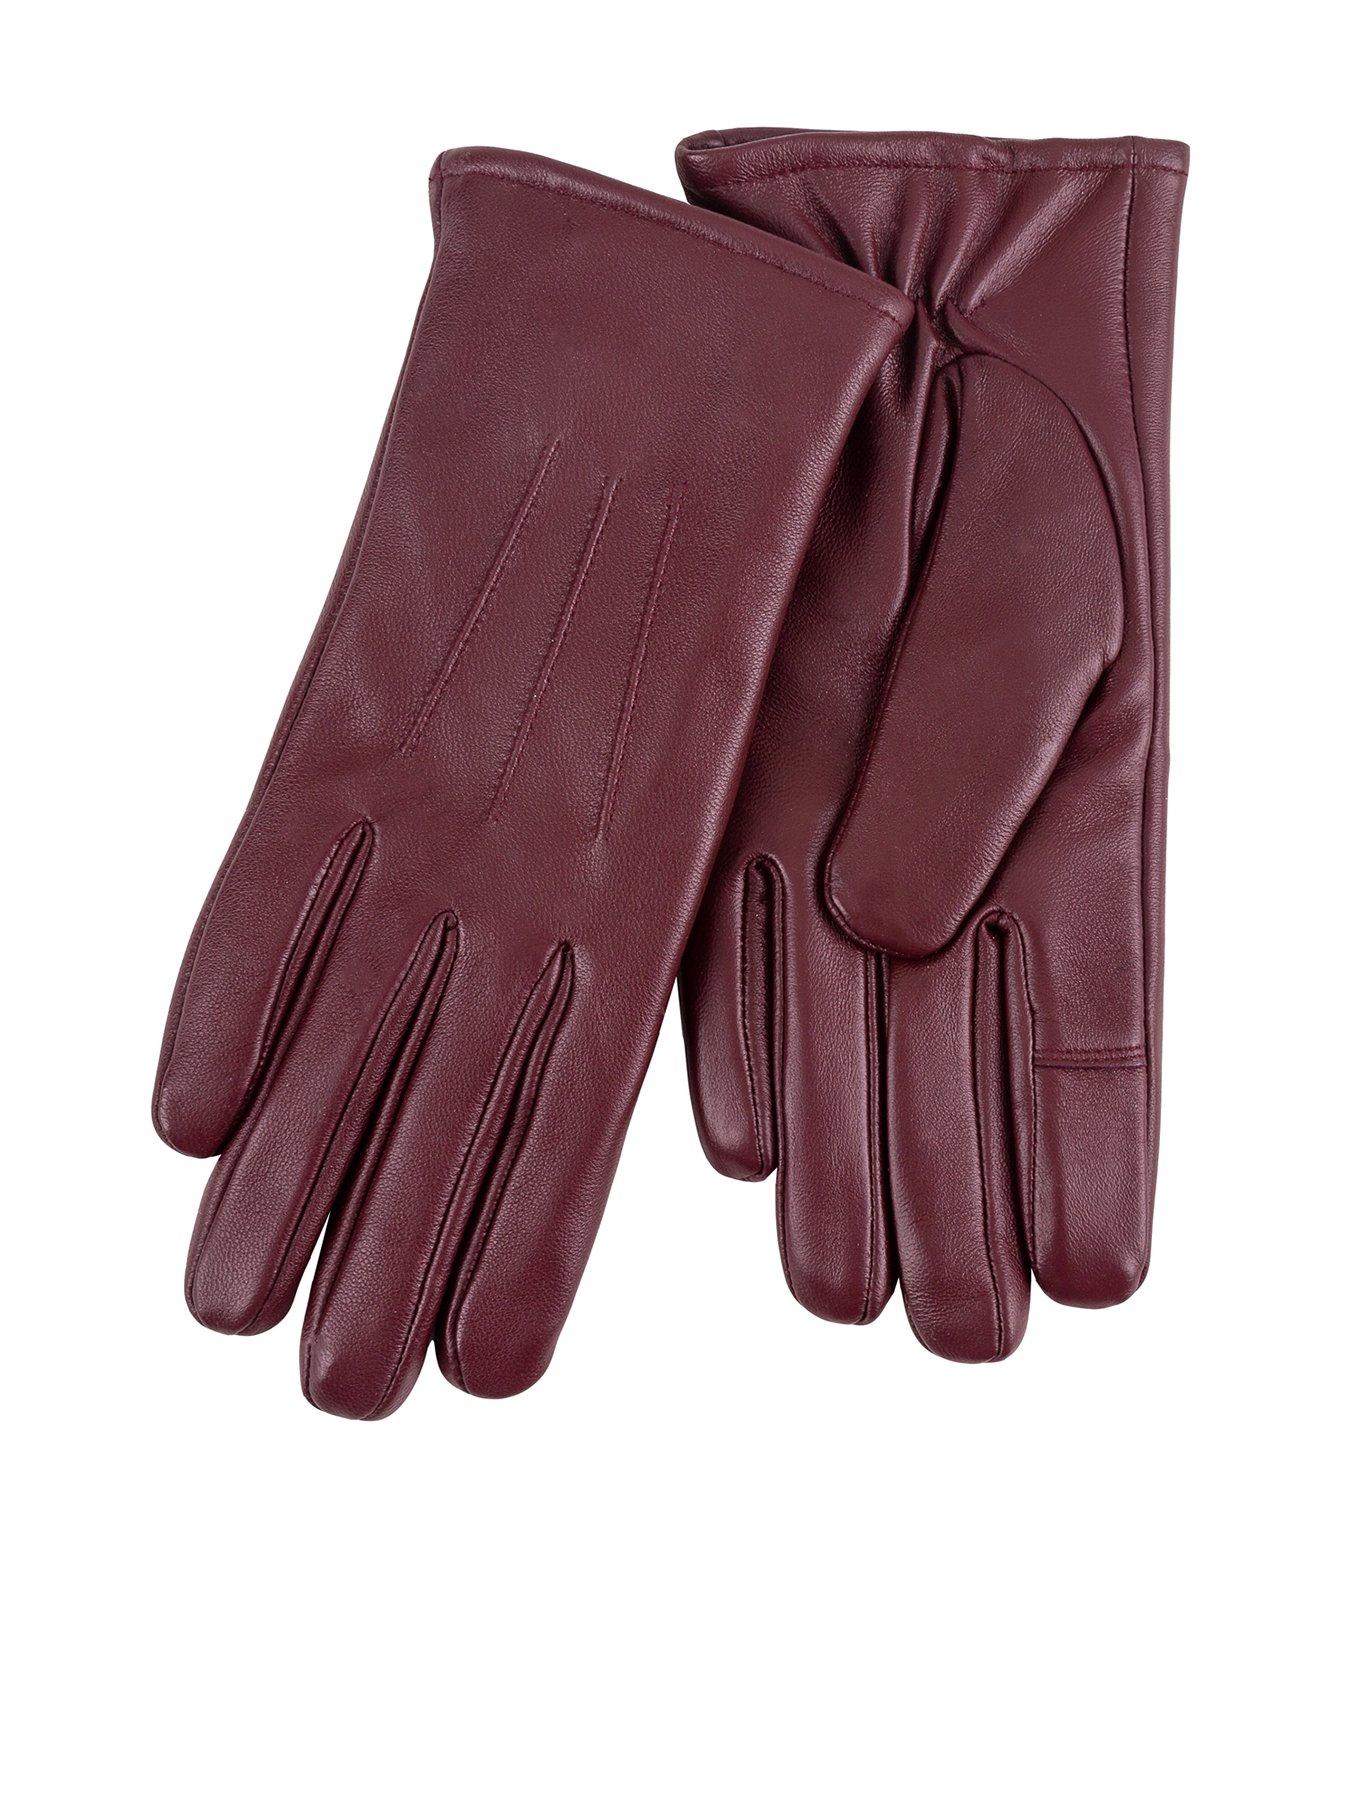 Accessories 3 Point Smartouch Leather Gloves - Burgundy